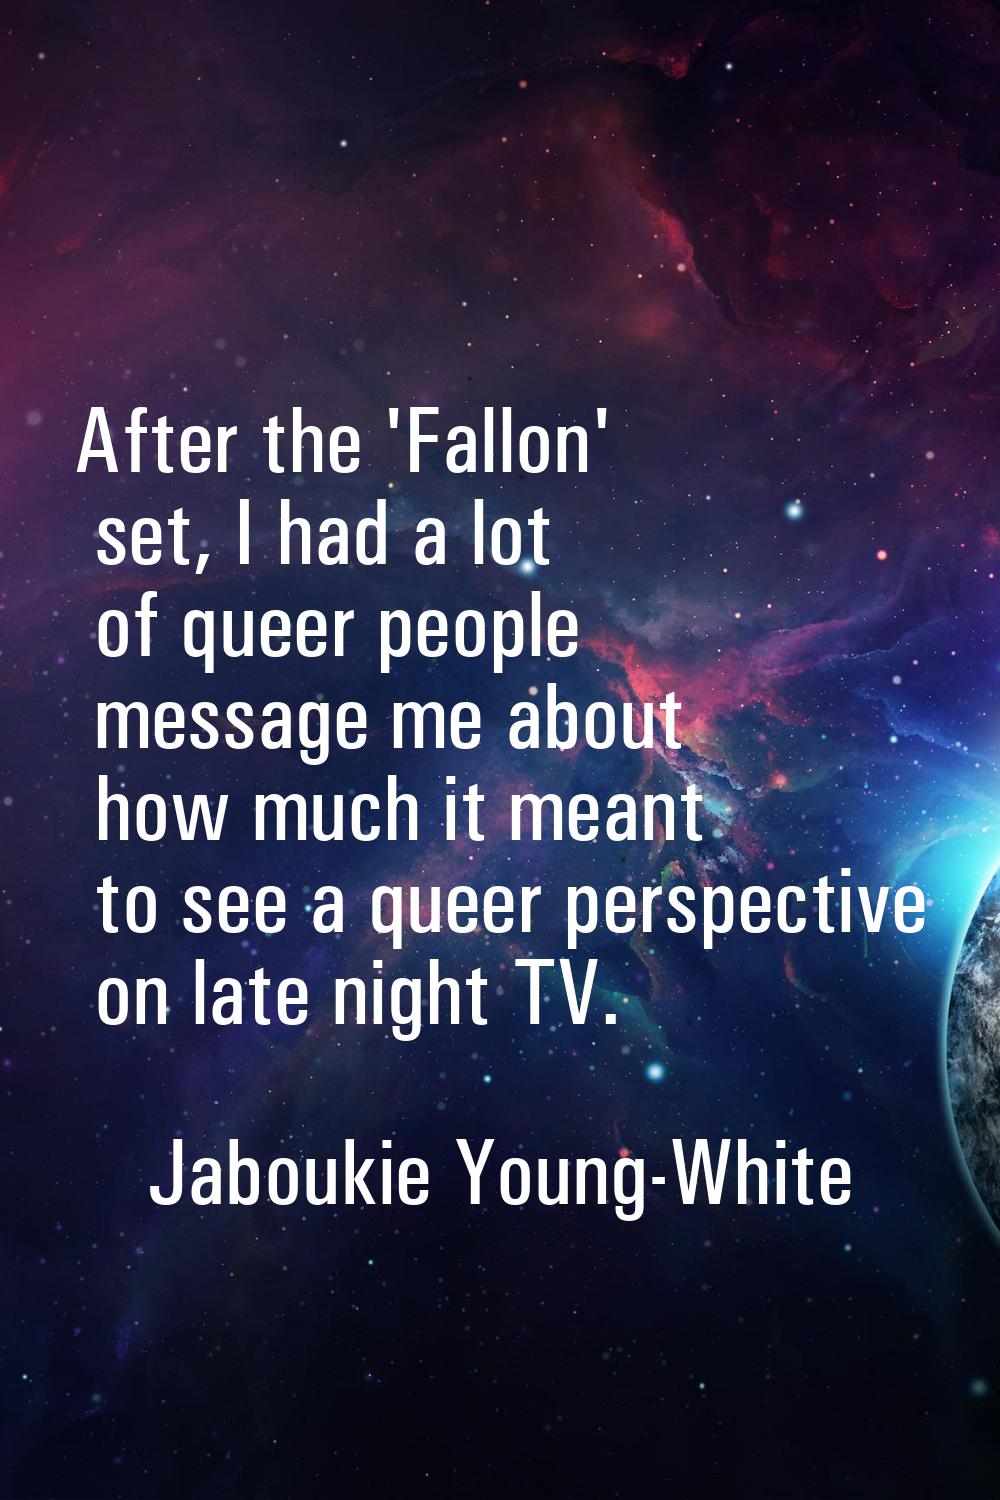 After the 'Fallon' set, I had a lot of queer people message me about how much it meant to see a que